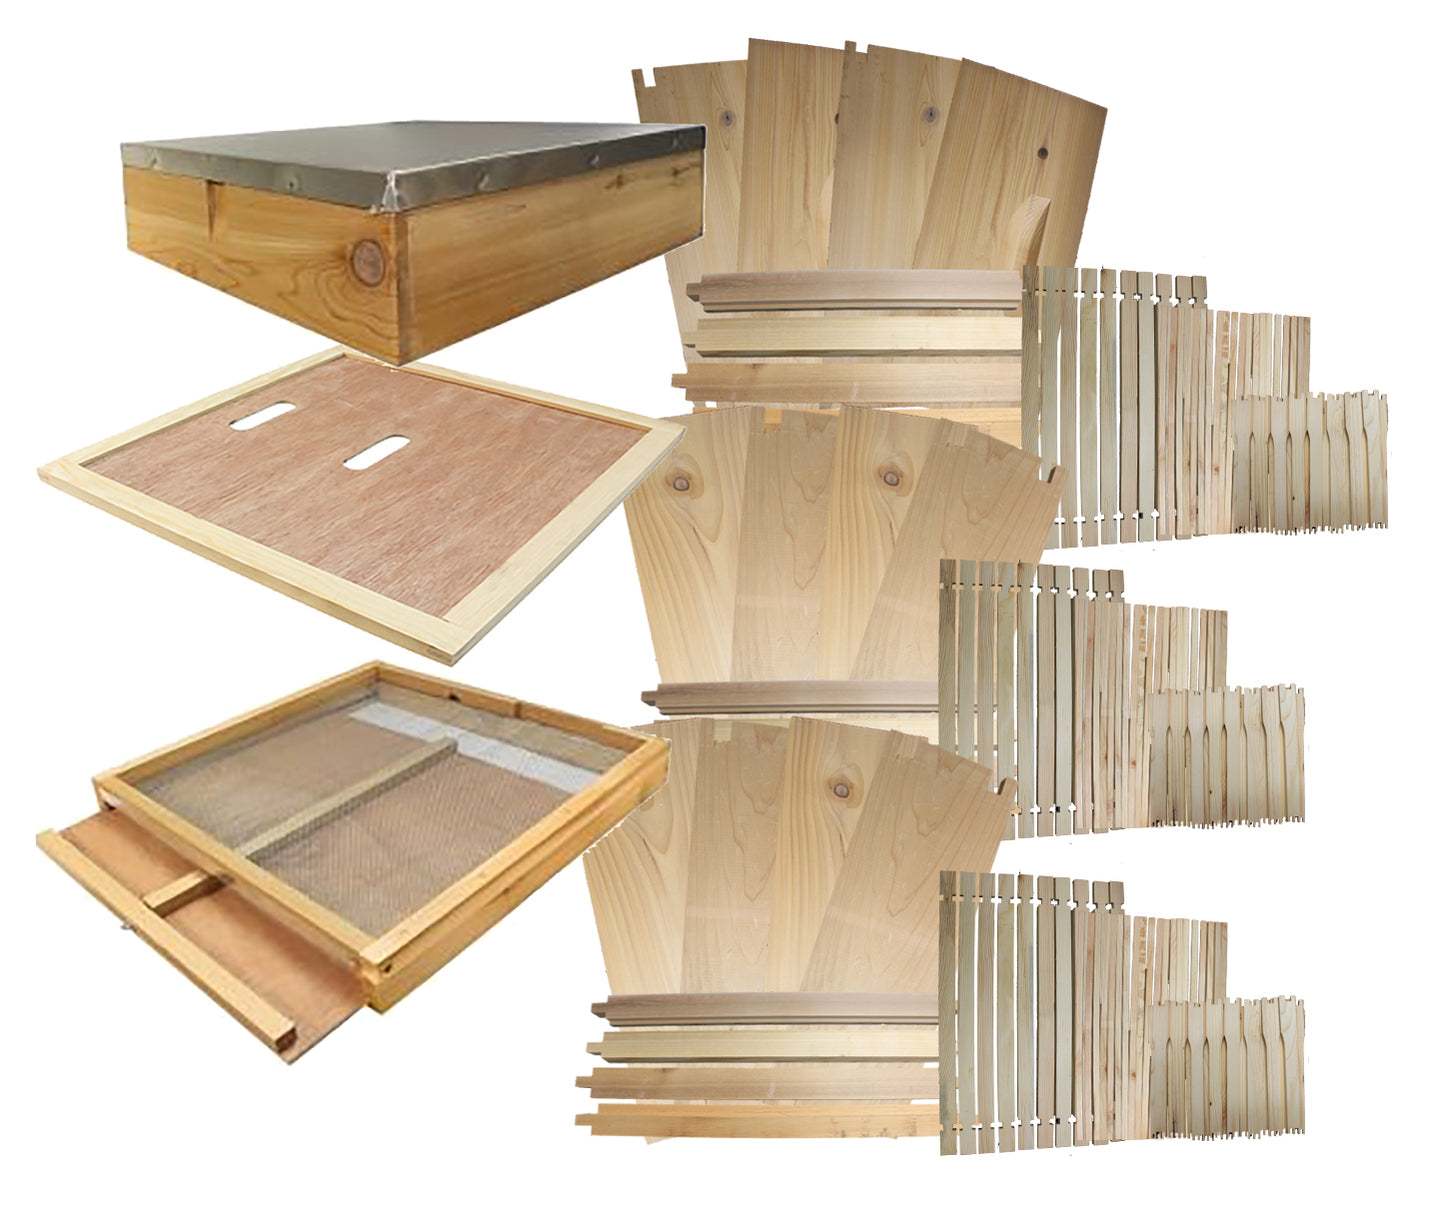 B.S. National Complete Hive Kit, Flat, Cedar, With Plastic Foundation - Bee Equipment